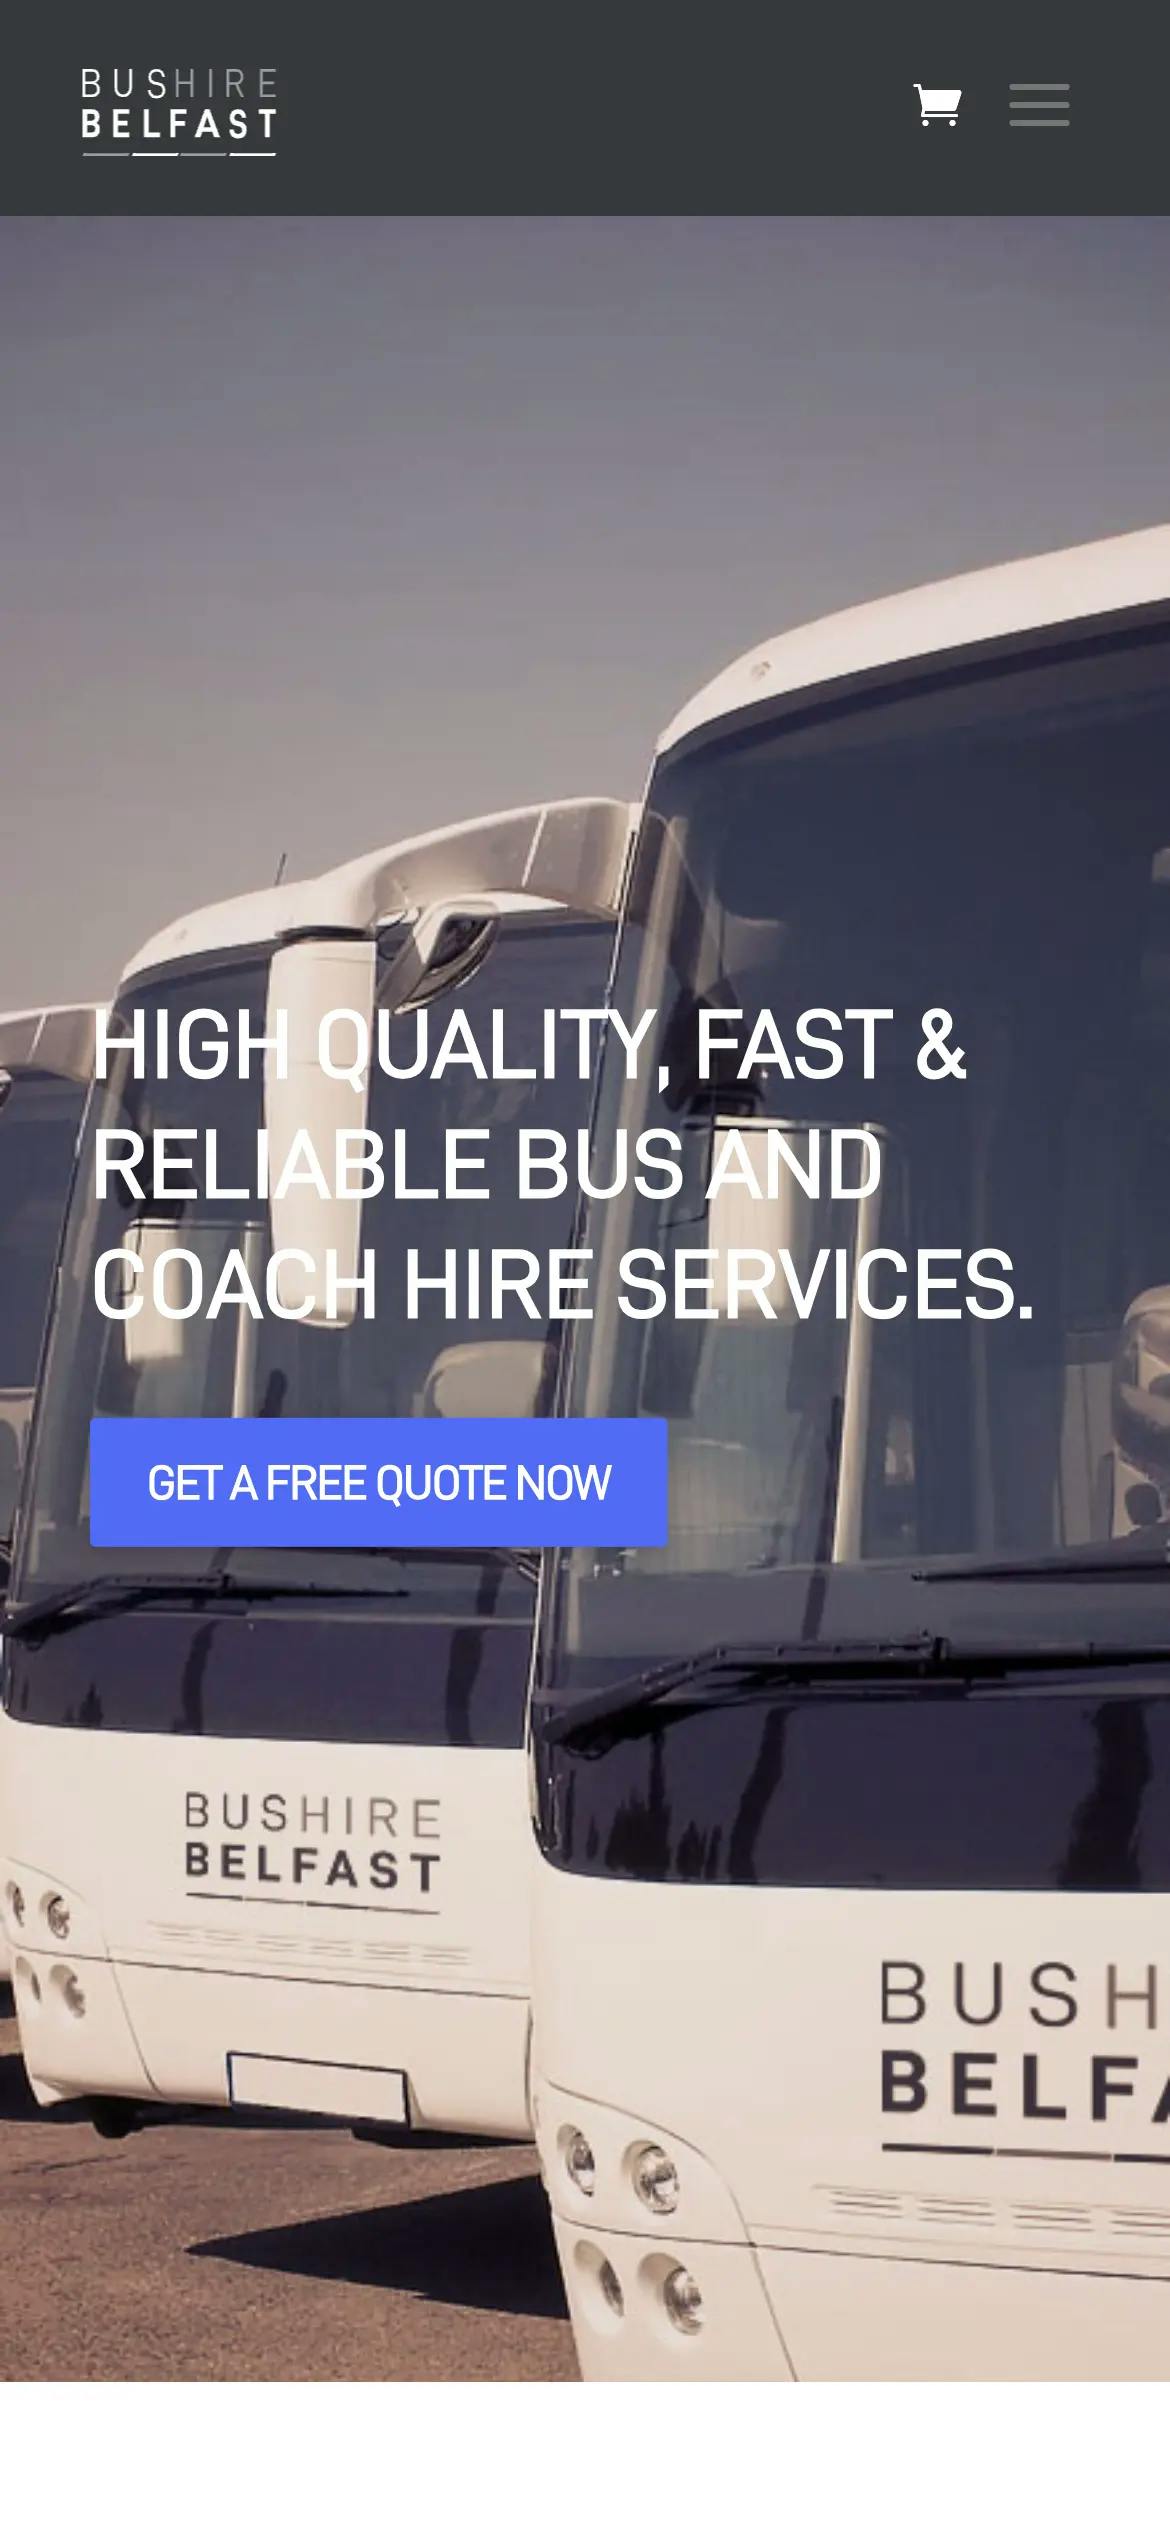 Bus Hire Belfast home page website design on mobile